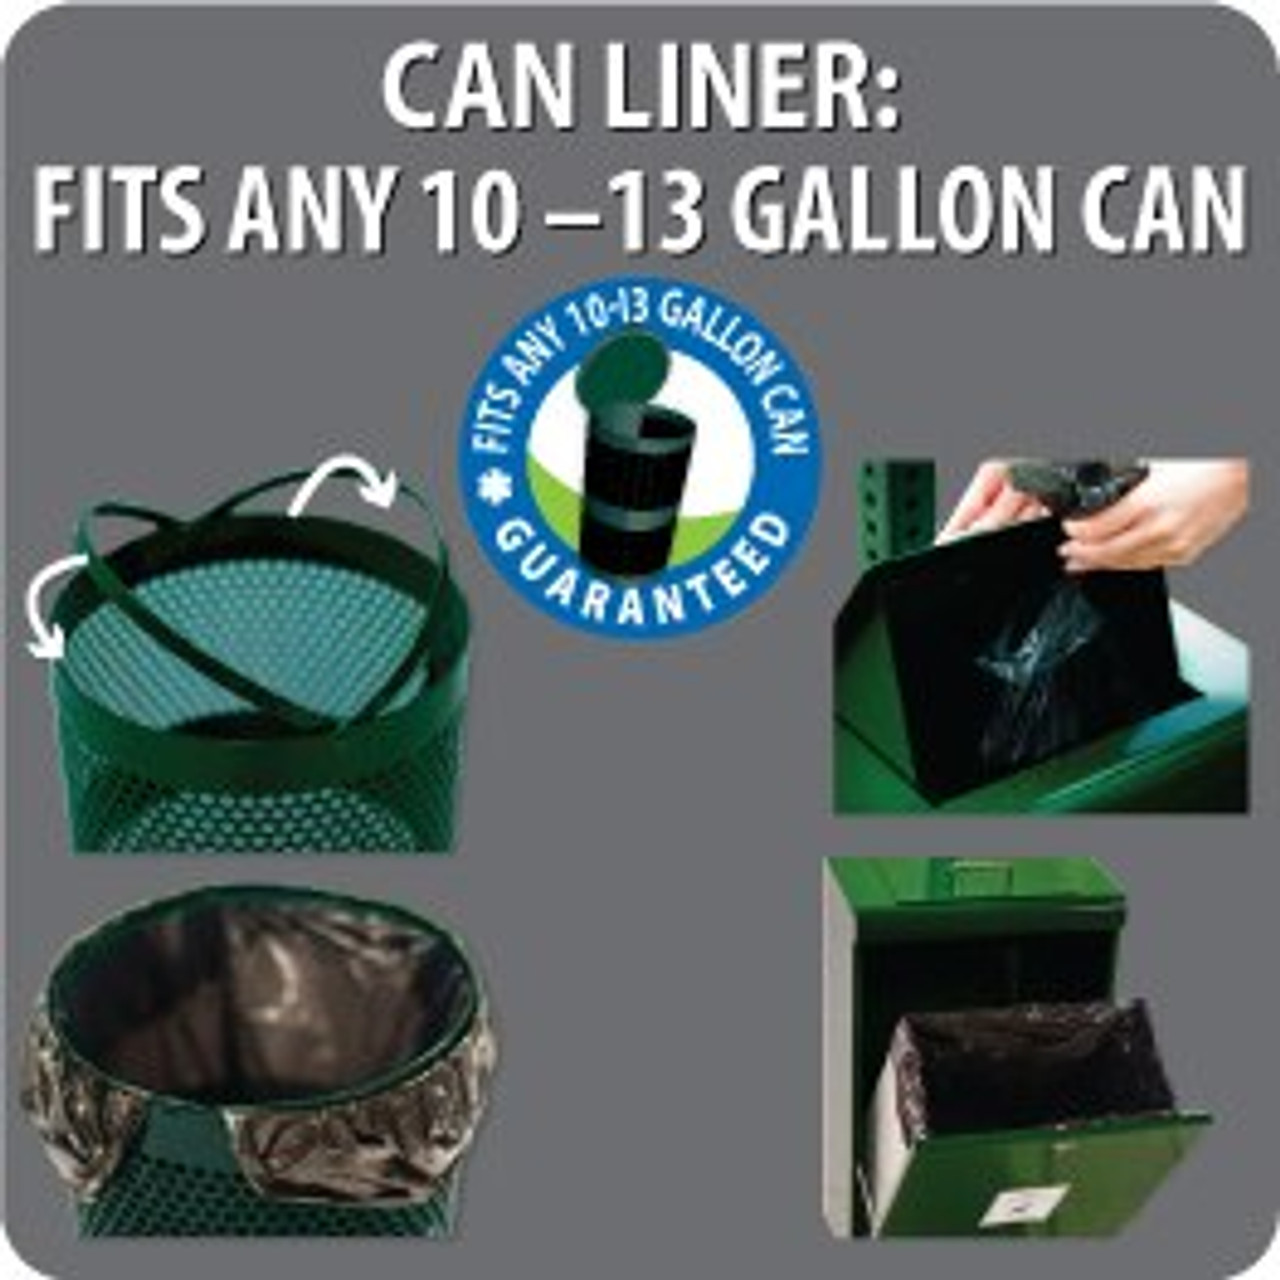 Can Liner Fits ANY 10-13 Gallon Can